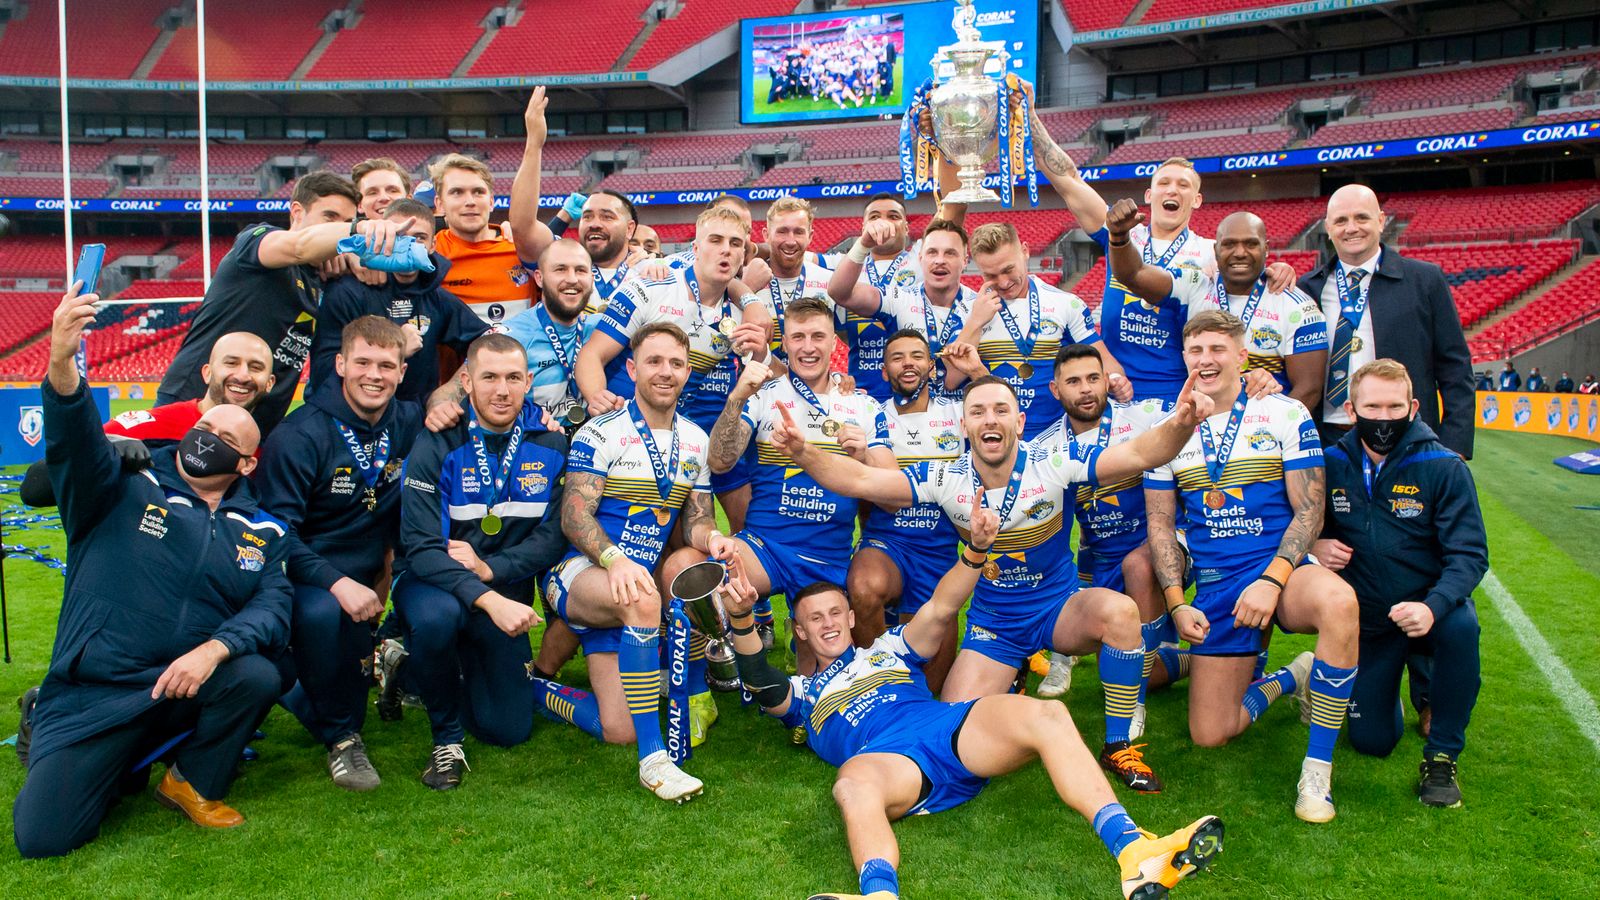 Challenge Cup Leeds drawn to face St Helens in round three Rugby